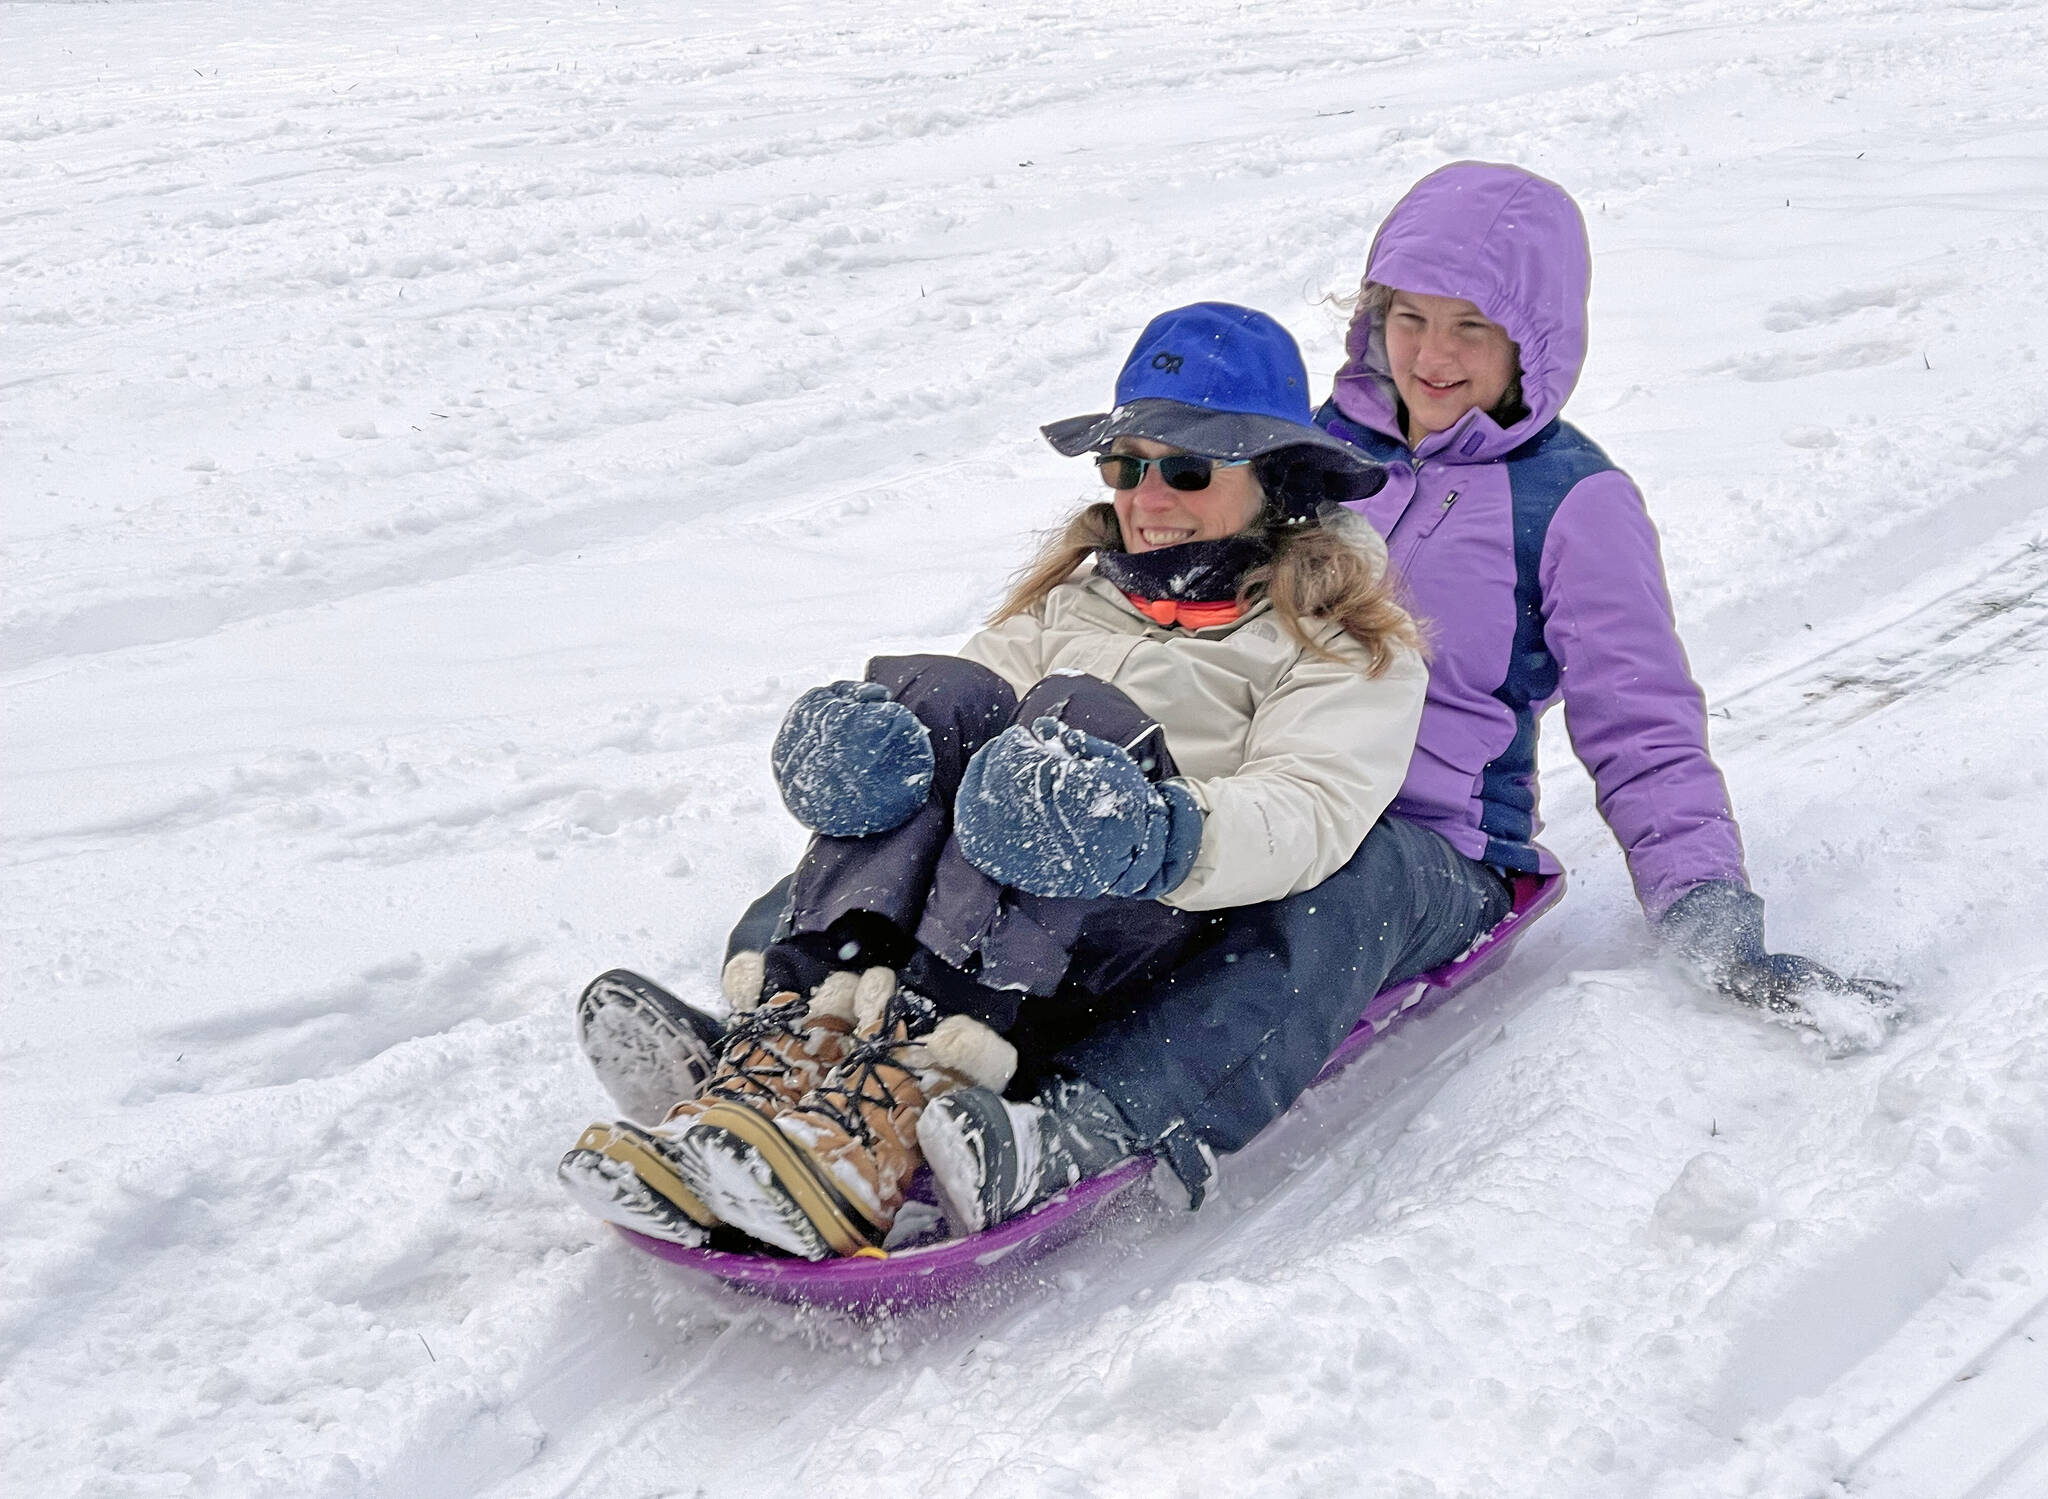 Photo by Scott Price
Karen Price, left, and Lydia Price sled down a hill in the backyard of their Coupeville home.